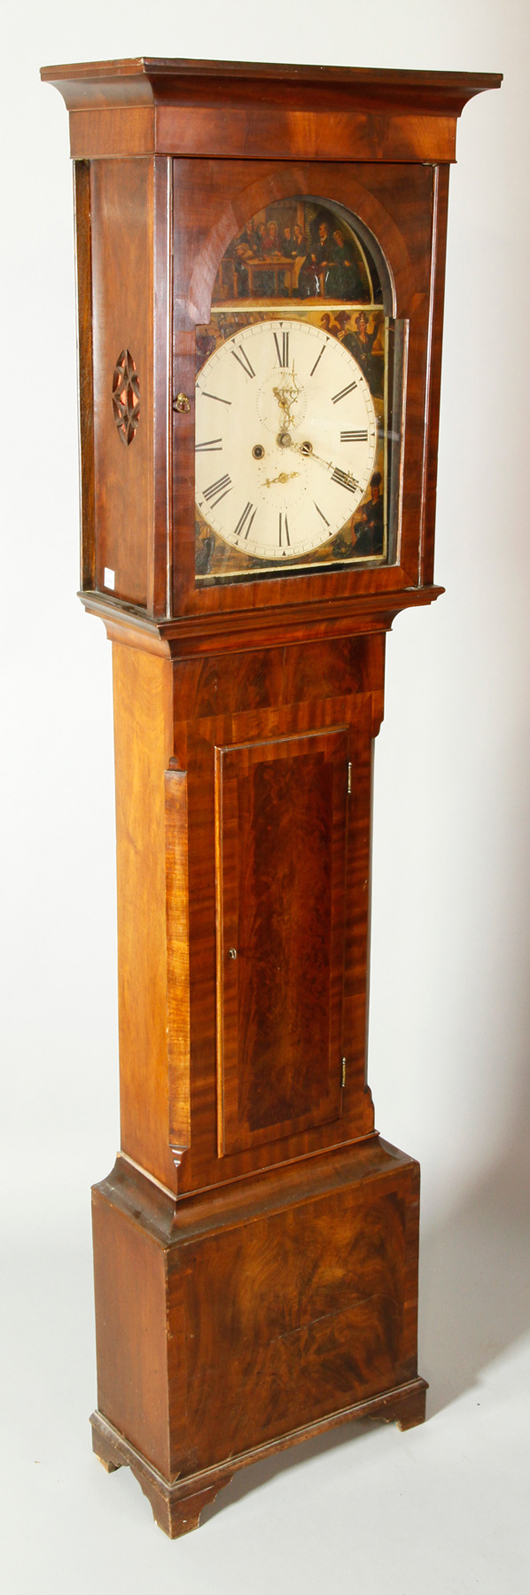 Nineteenth century A. Breckenridge & Son Kilmarnock tall clock, walnut, time and strike, with key, 83 inches high, inches wide at base x 10 inches diameter. Image courtesy Kaminski Auctions.